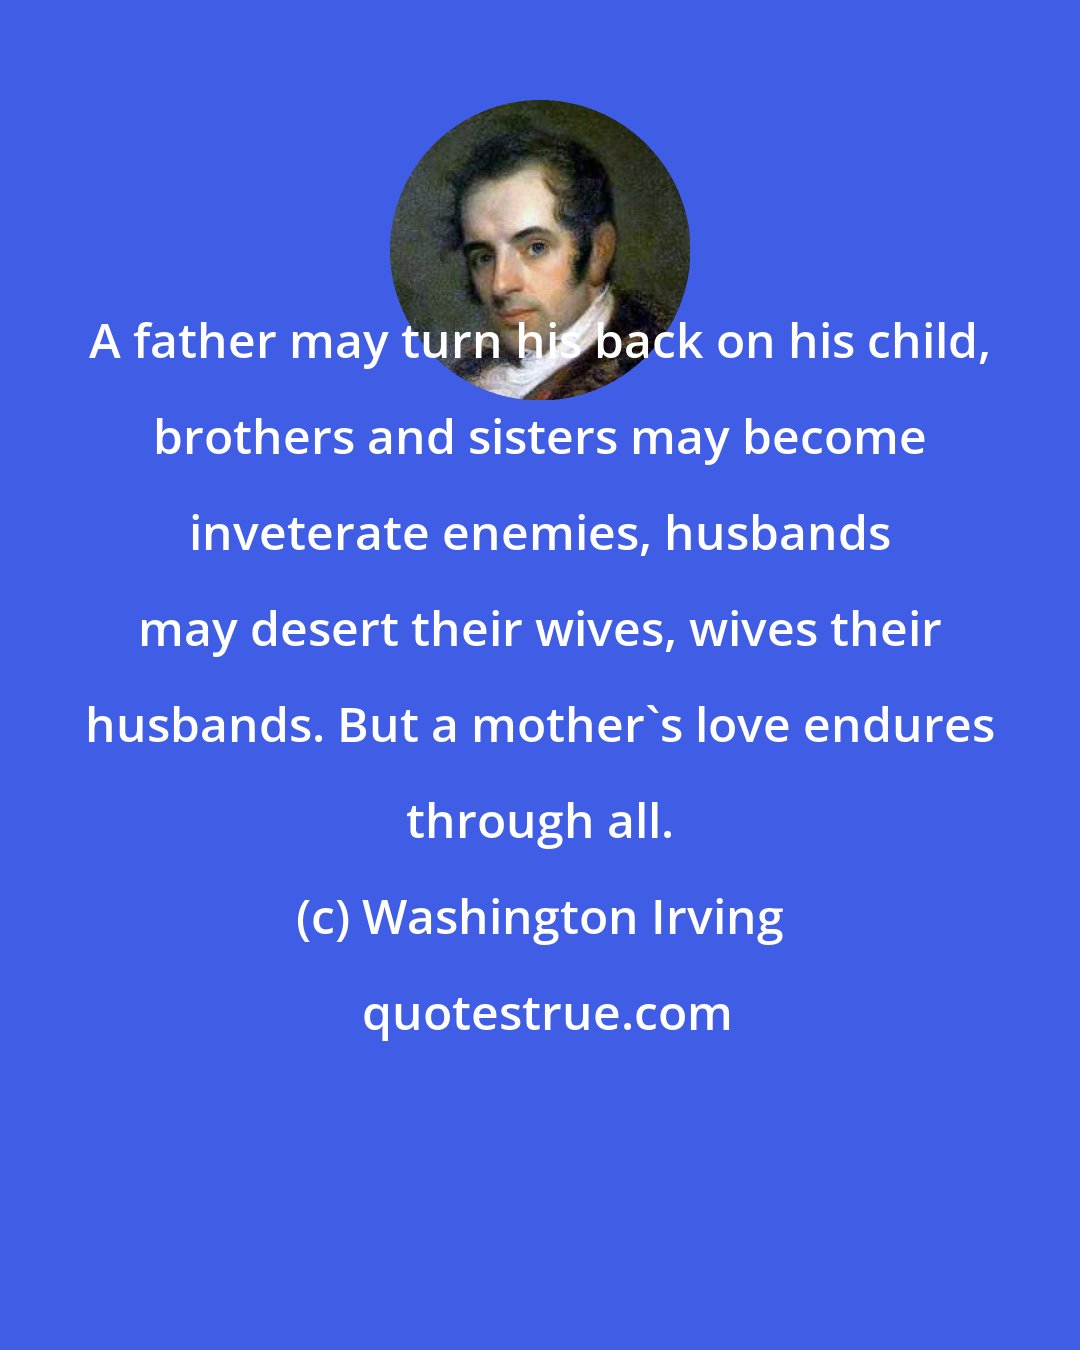 Washington Irving: A father may turn his back on his child, brothers and sisters may become inveterate enemies, husbands may desert their wives, wives their husbands. But a mother's love endures through all.